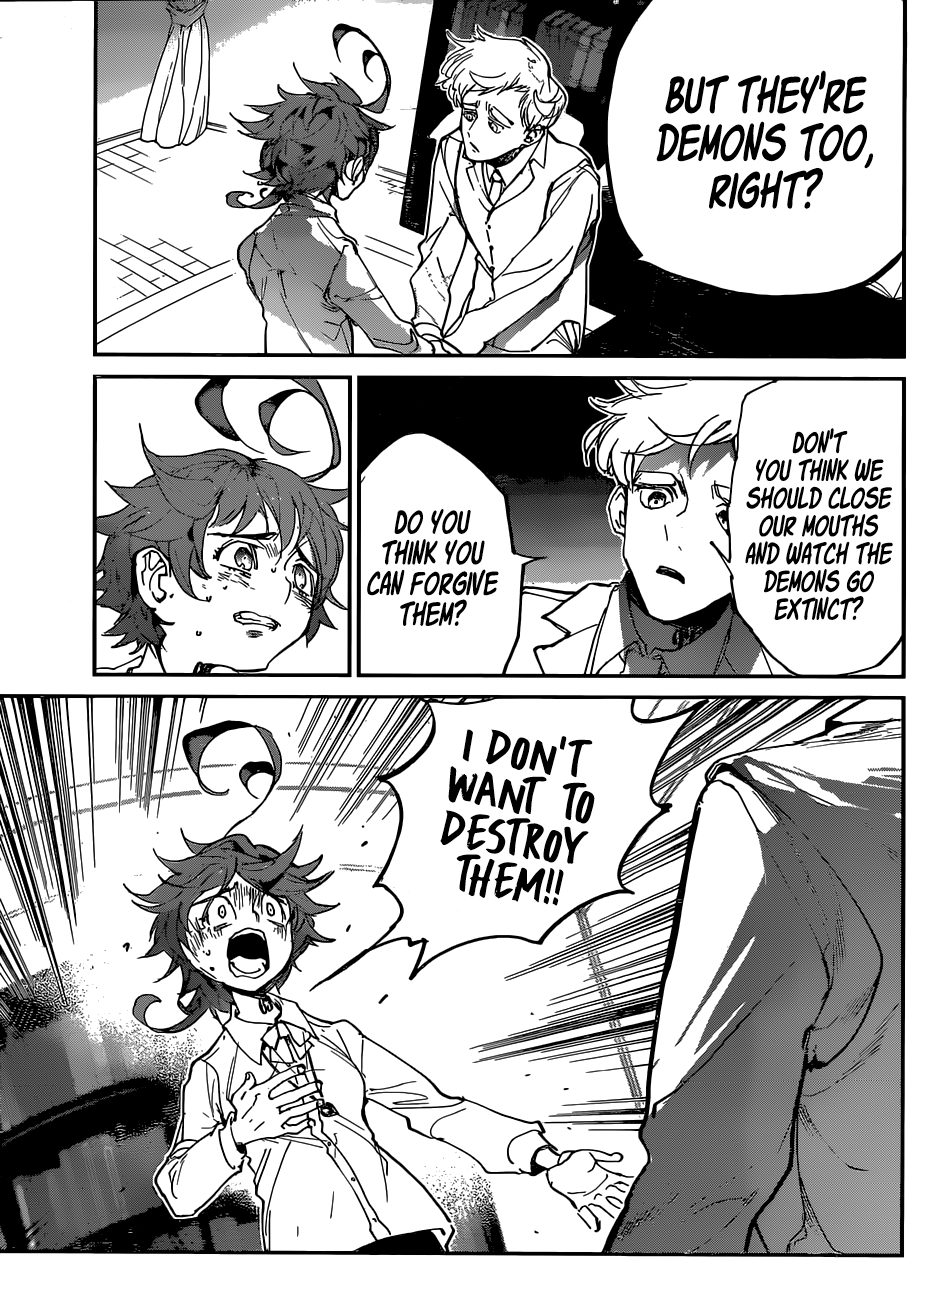 The Promised Neverland 127